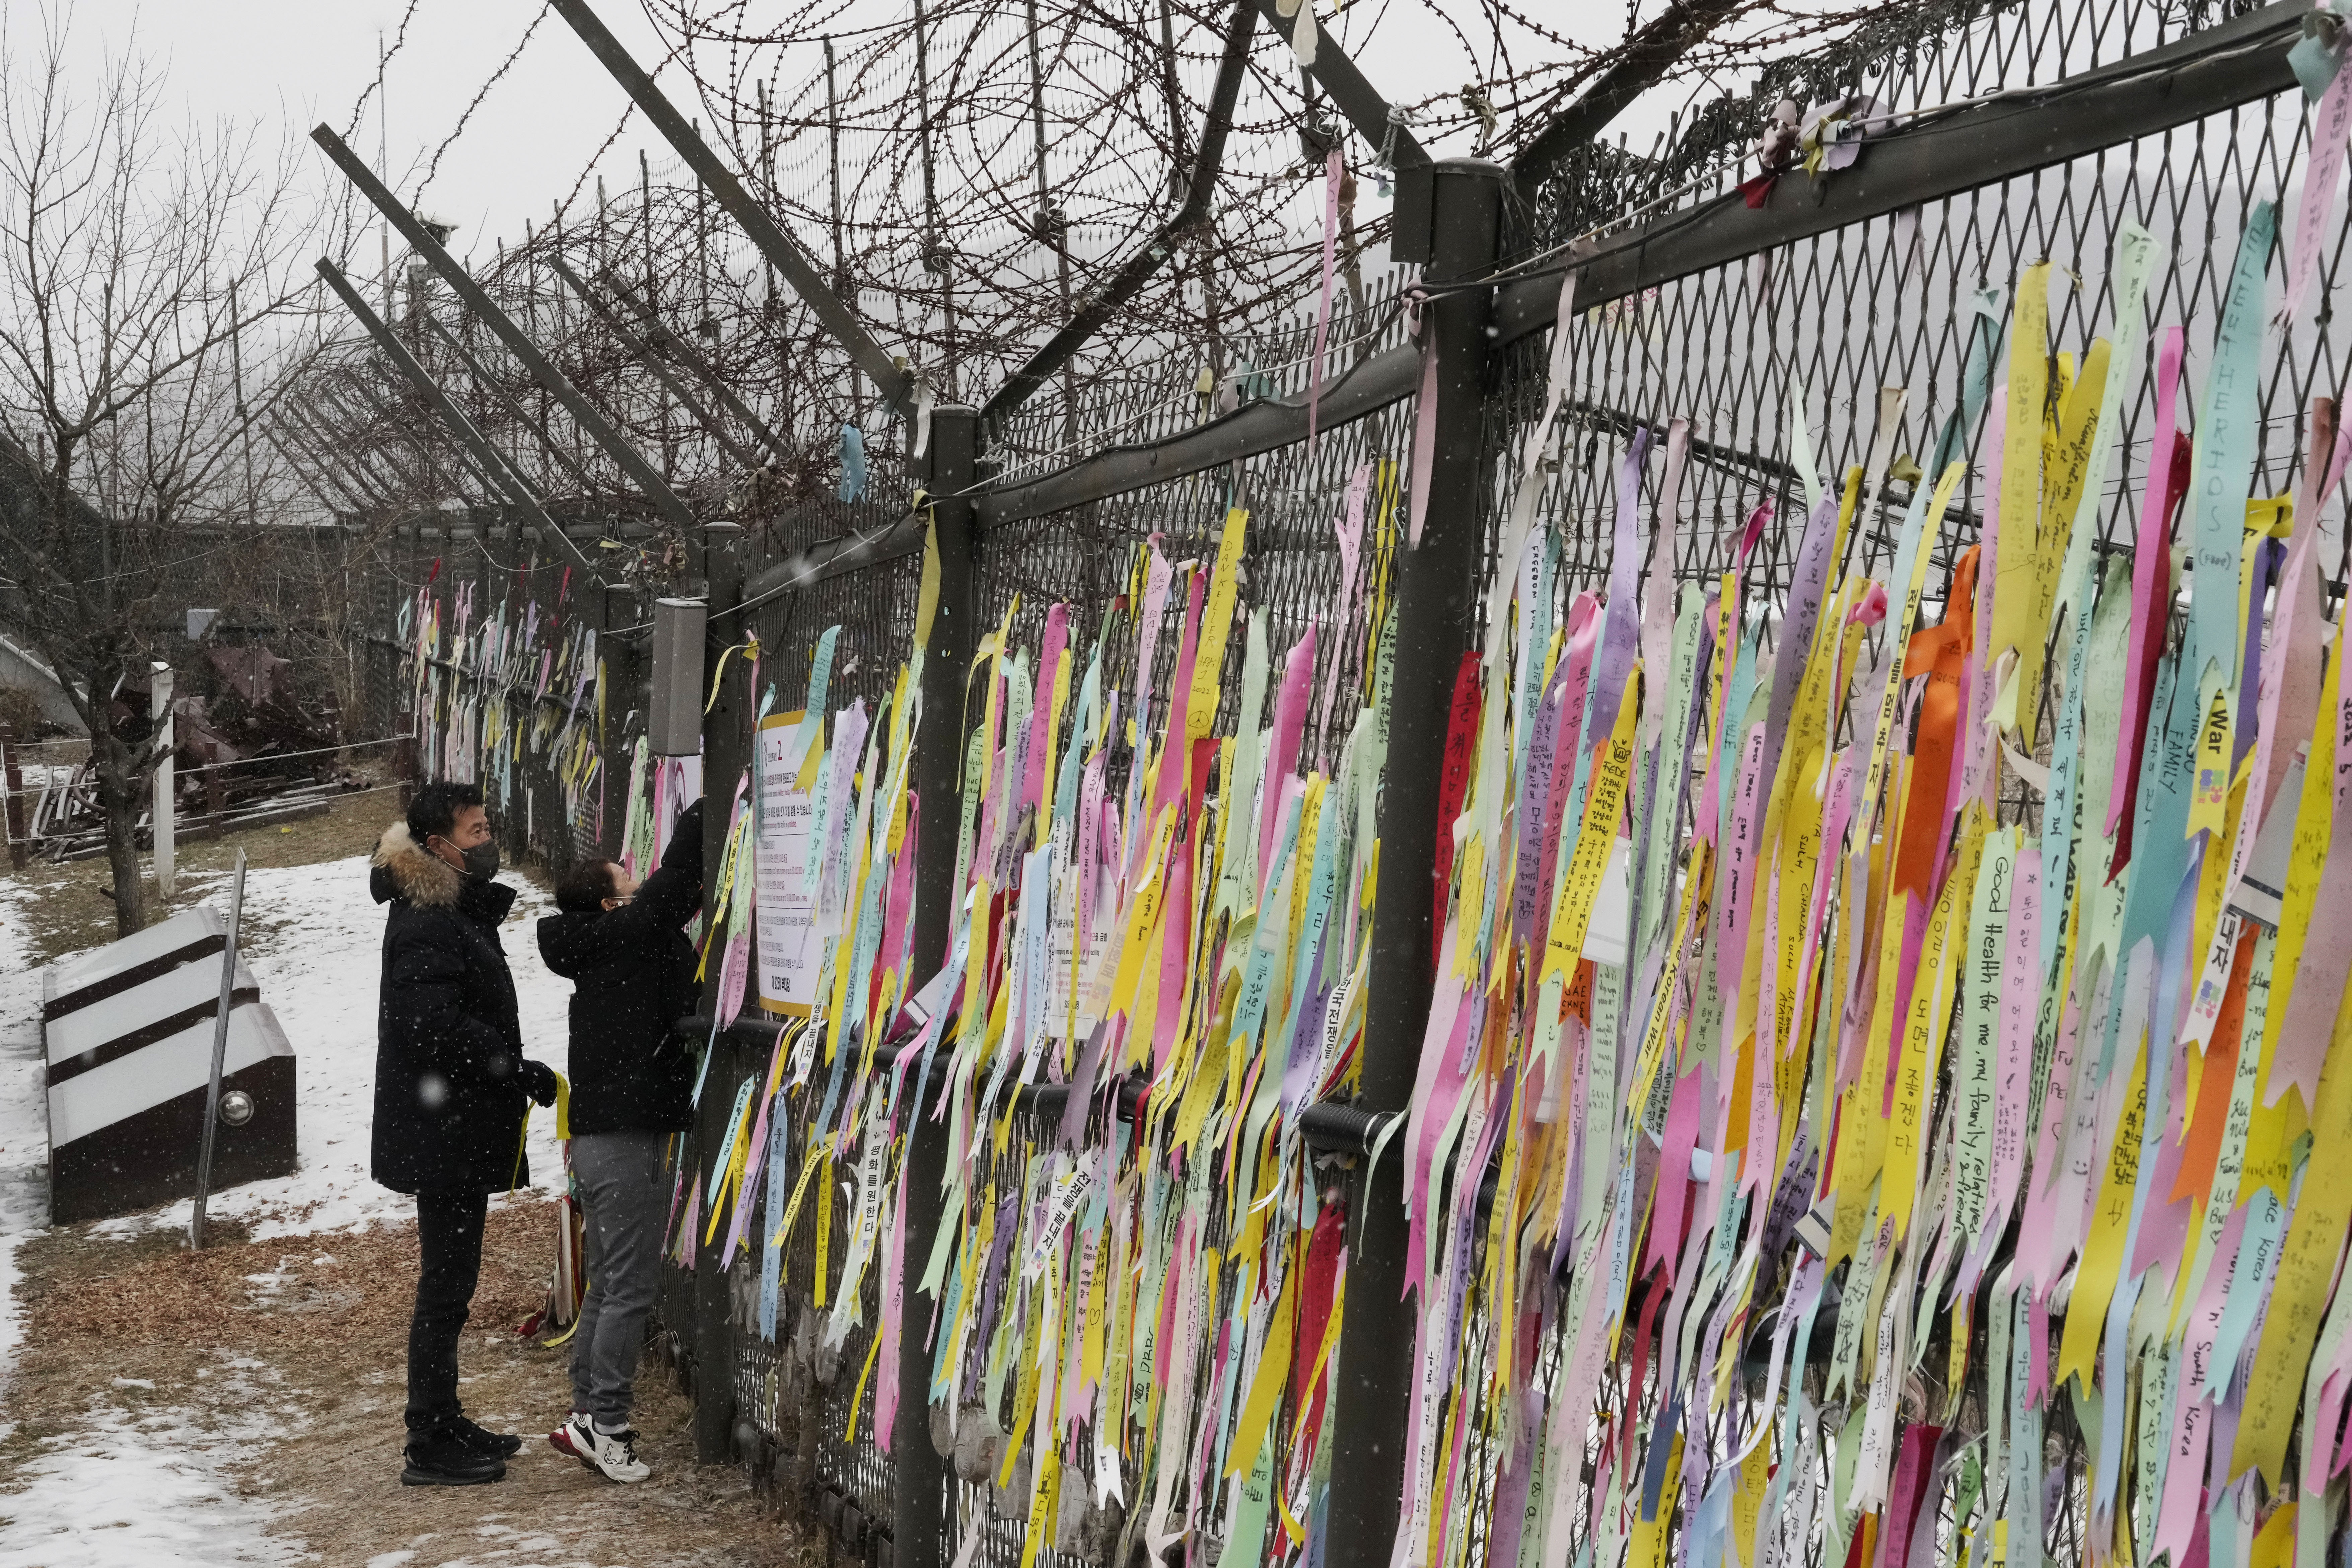 A woman hangs a ribbon wishing for the reunification of the two Koreas on a fence during a visit to the Imjingak Pavilion near the border with the North to celebrate the Lunar New Year in Paju, South Korea, Sunday, Jan. 22, 2023. (AP Photo/Ahn Young-joon)